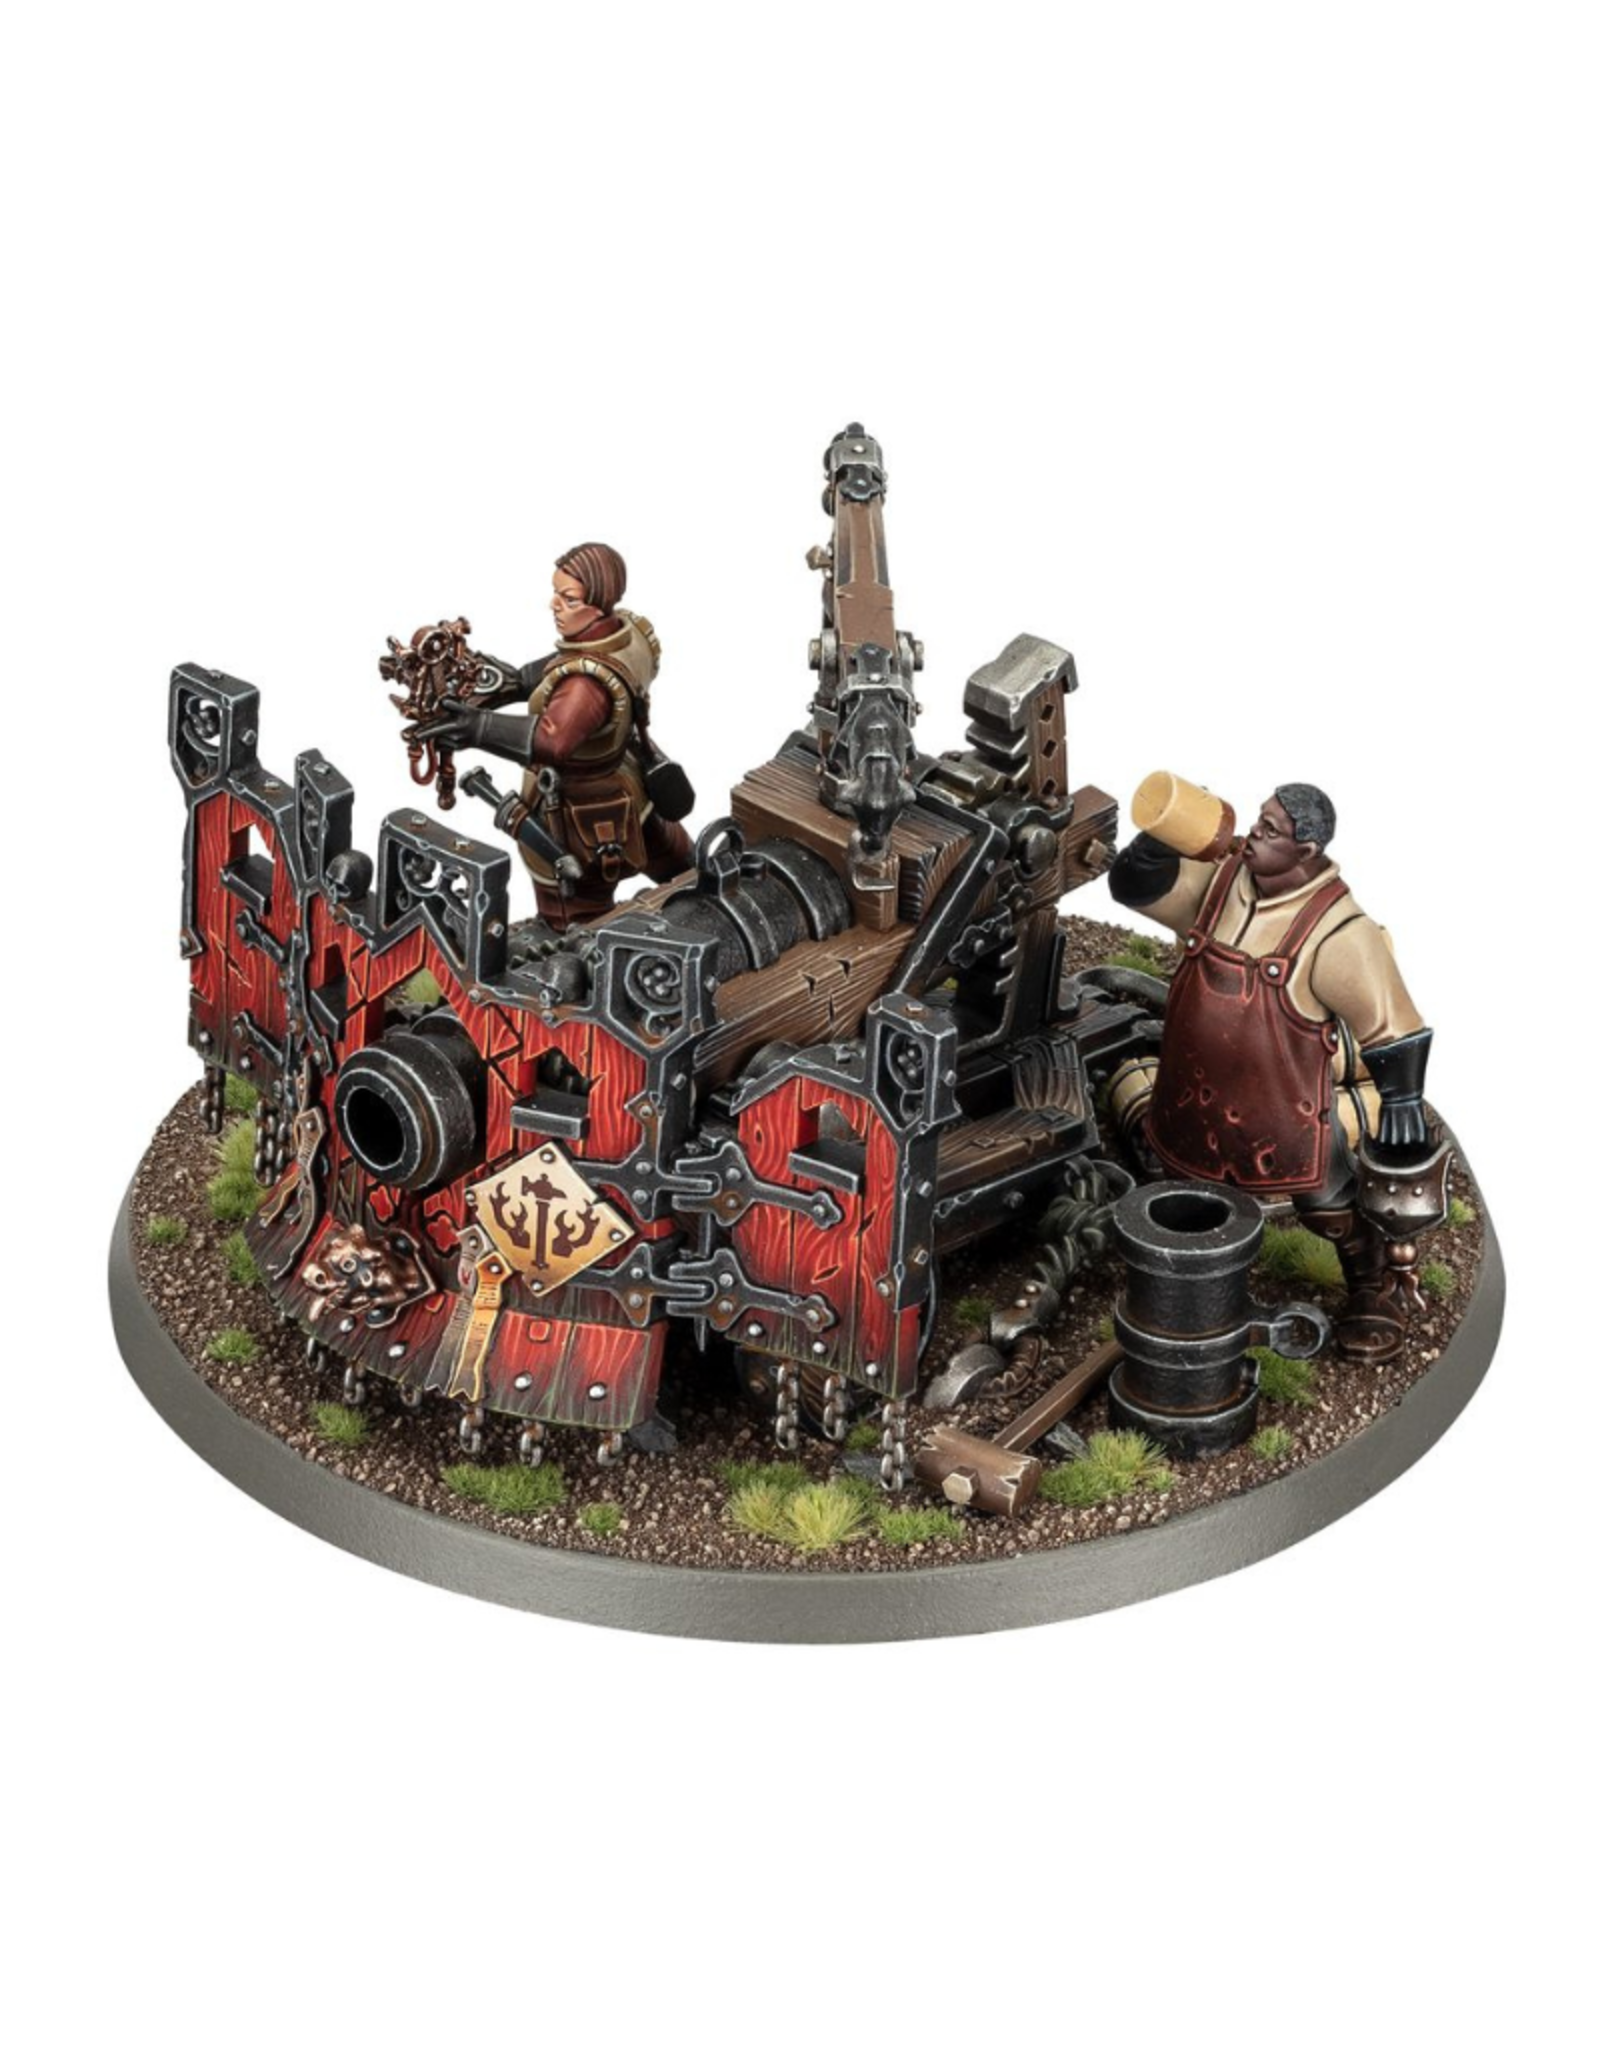 Games Workshop Cities of Sigmar: Ironweld Great Cannon